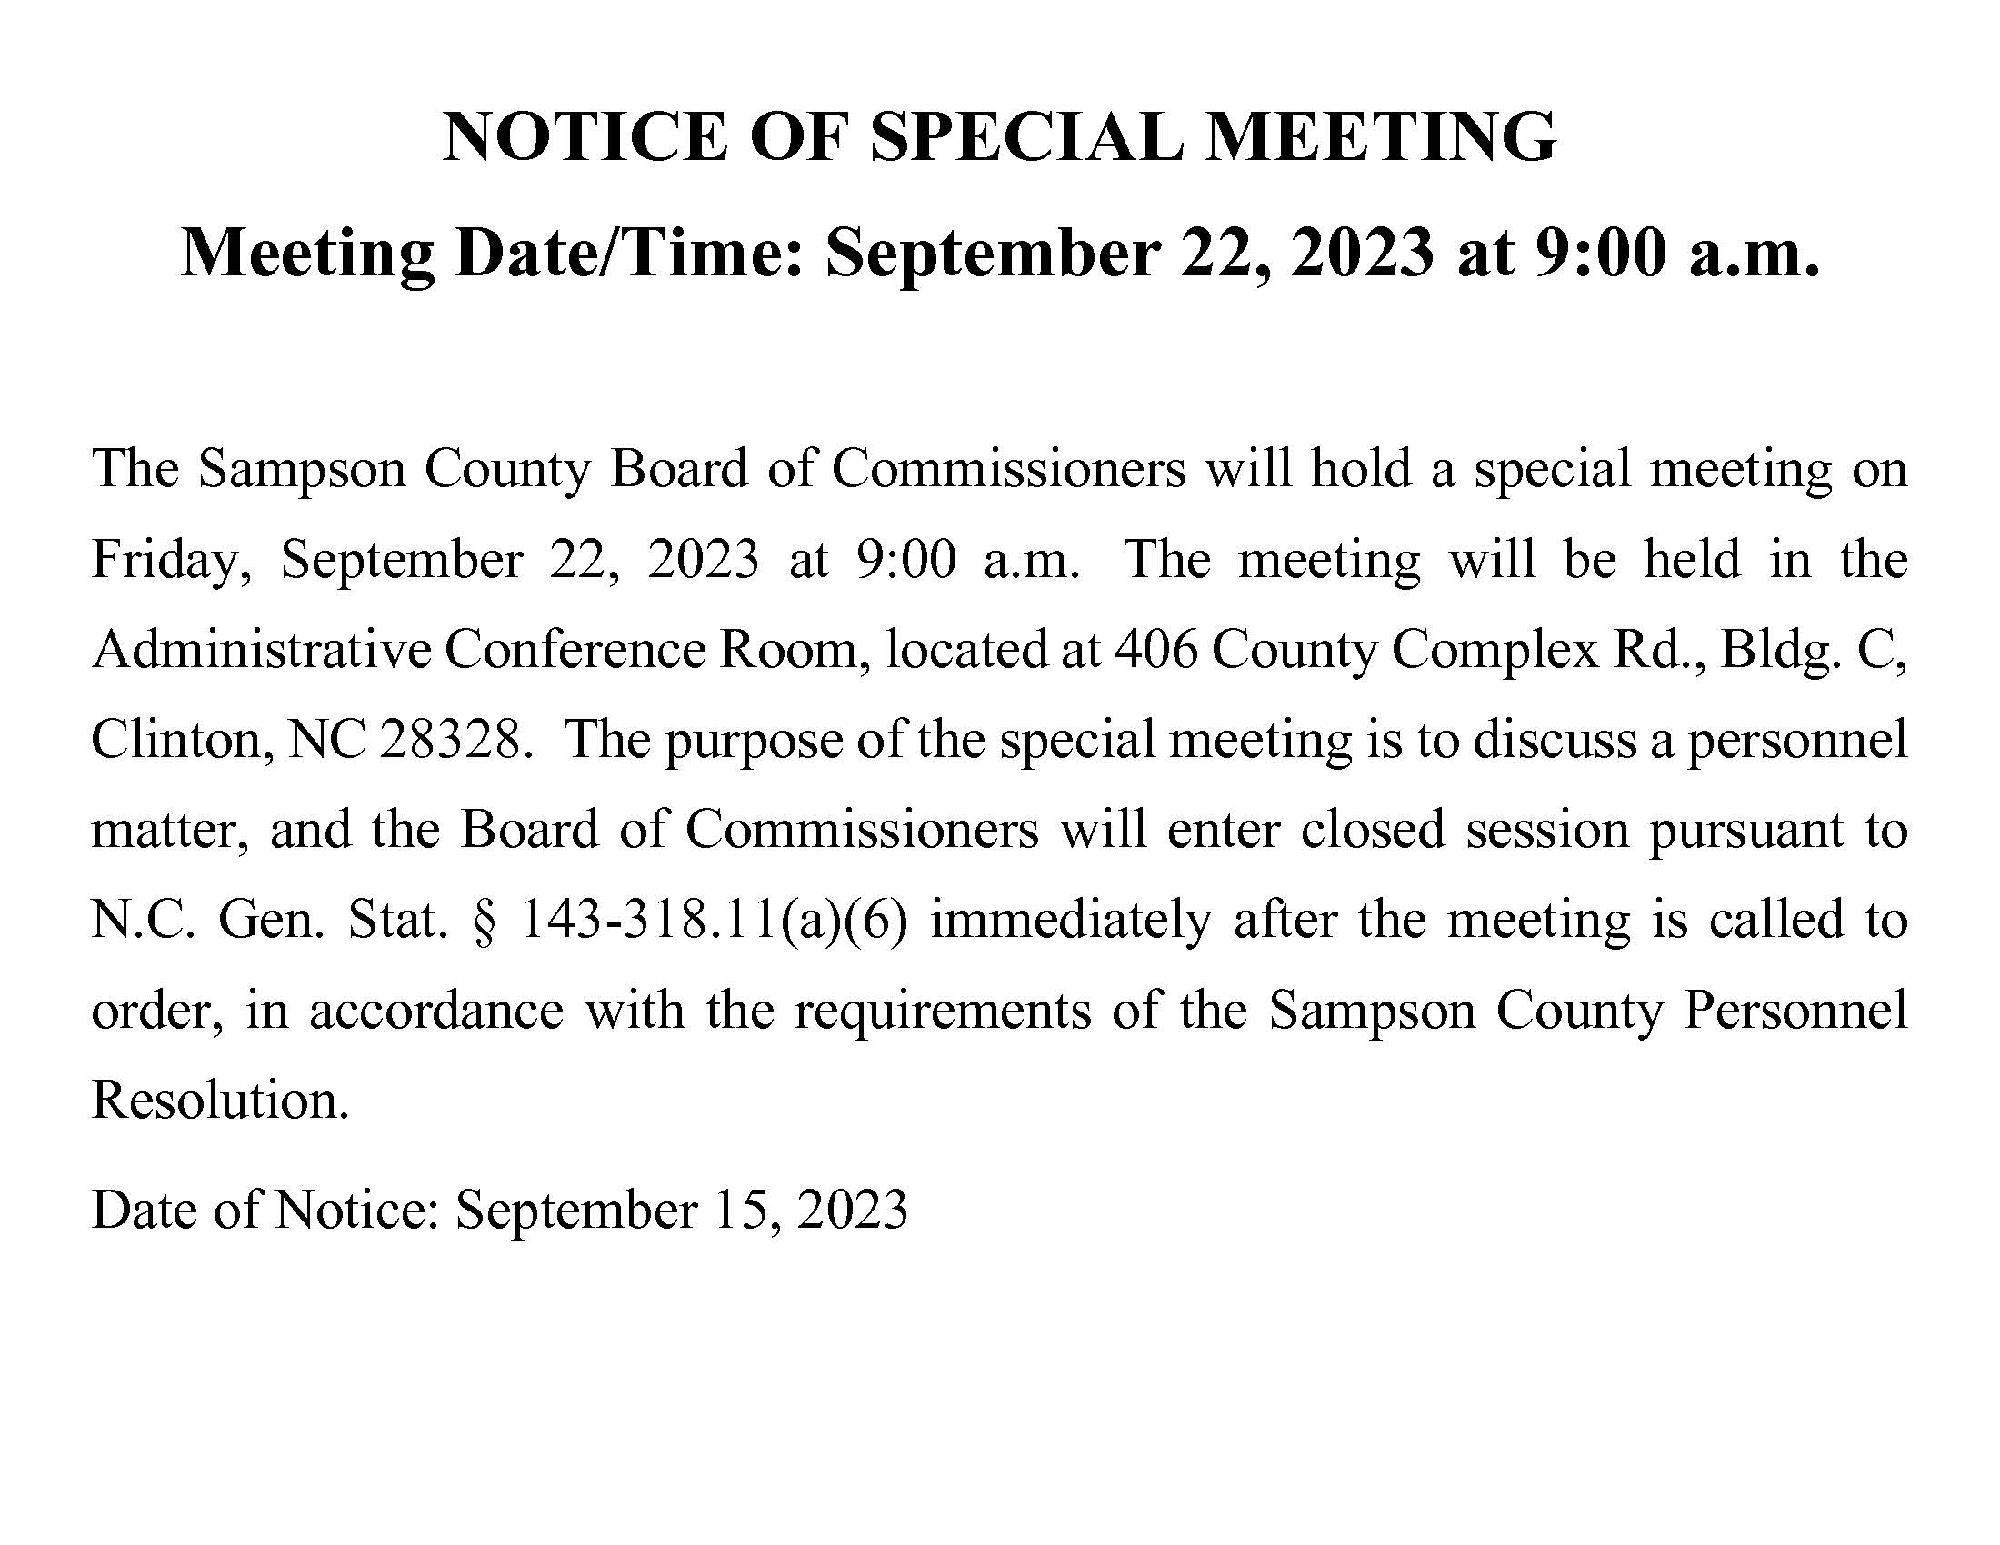 NOTICE OF SPECIAL MEETING 9.22.23